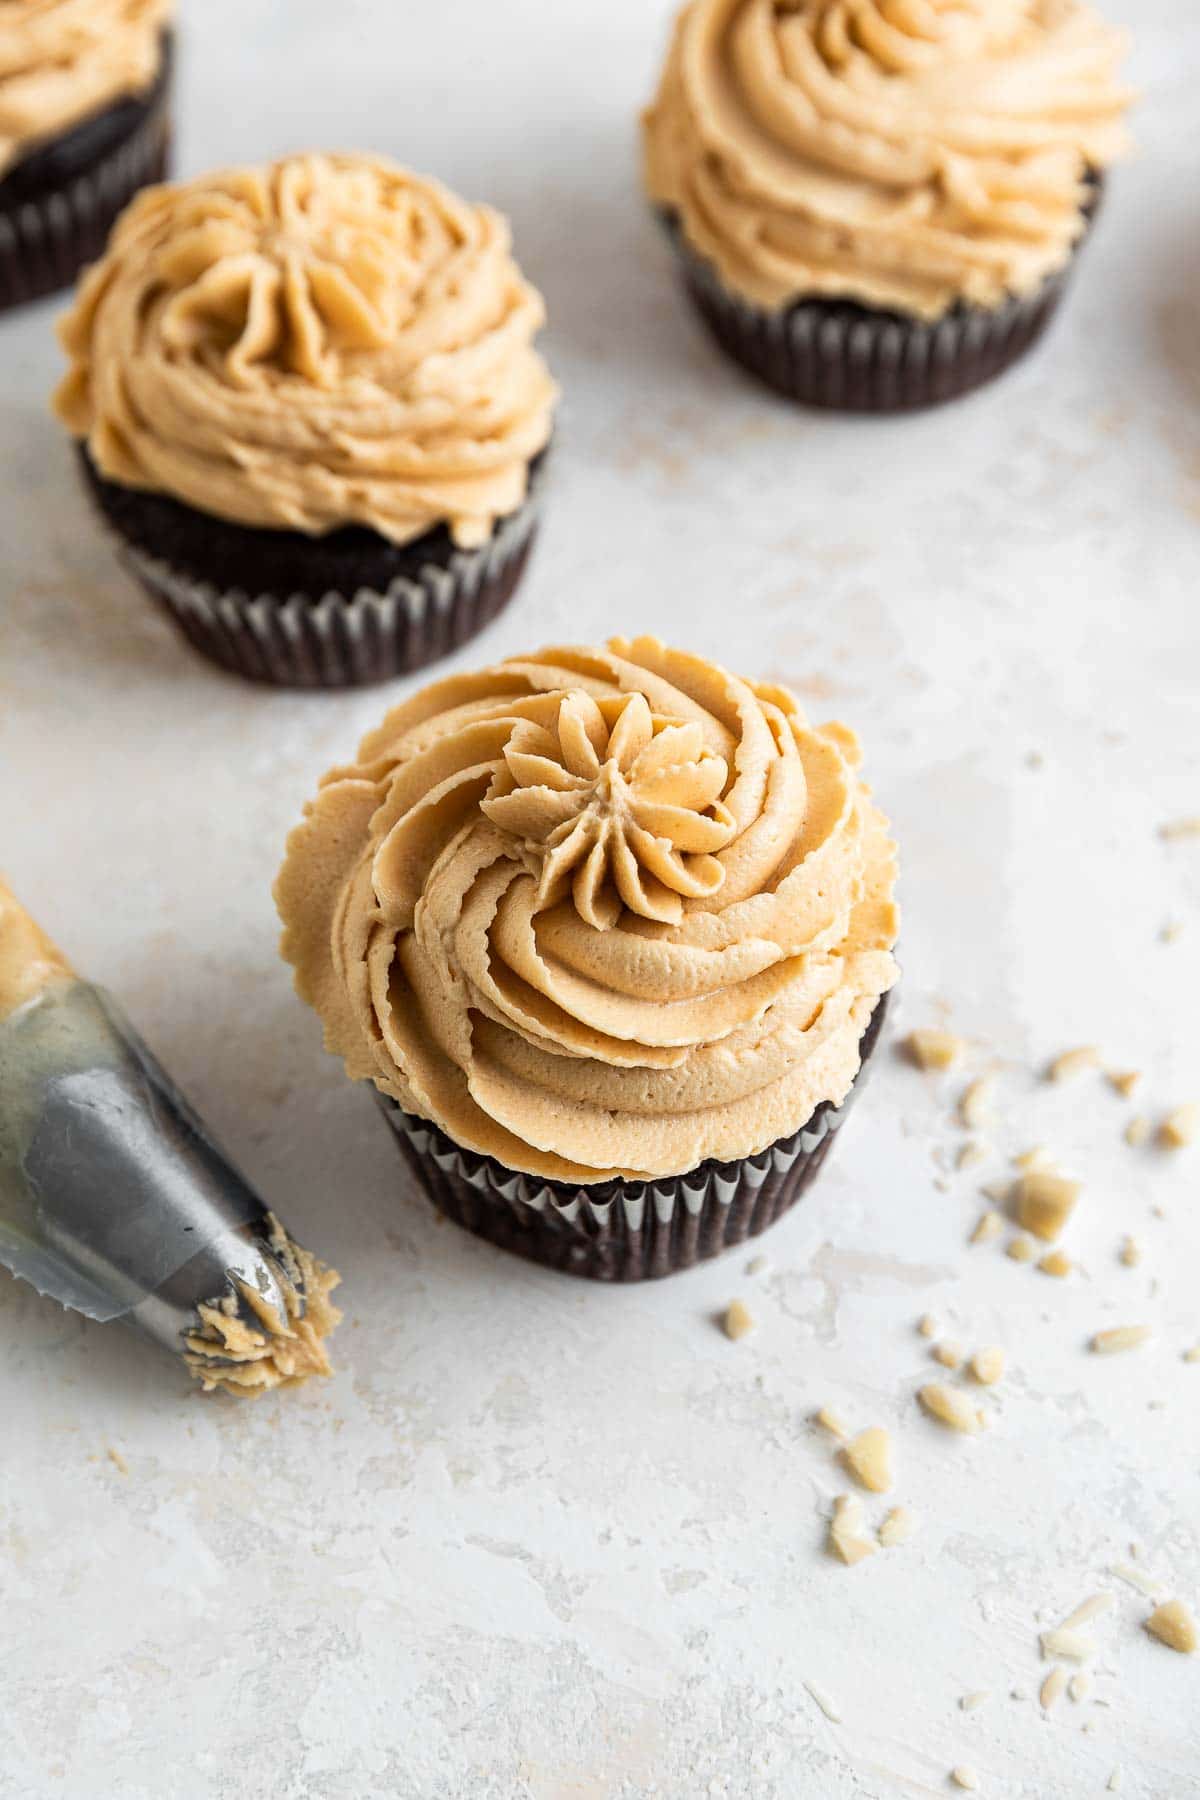 Four chocolate cupcakes with piped frosting on top.